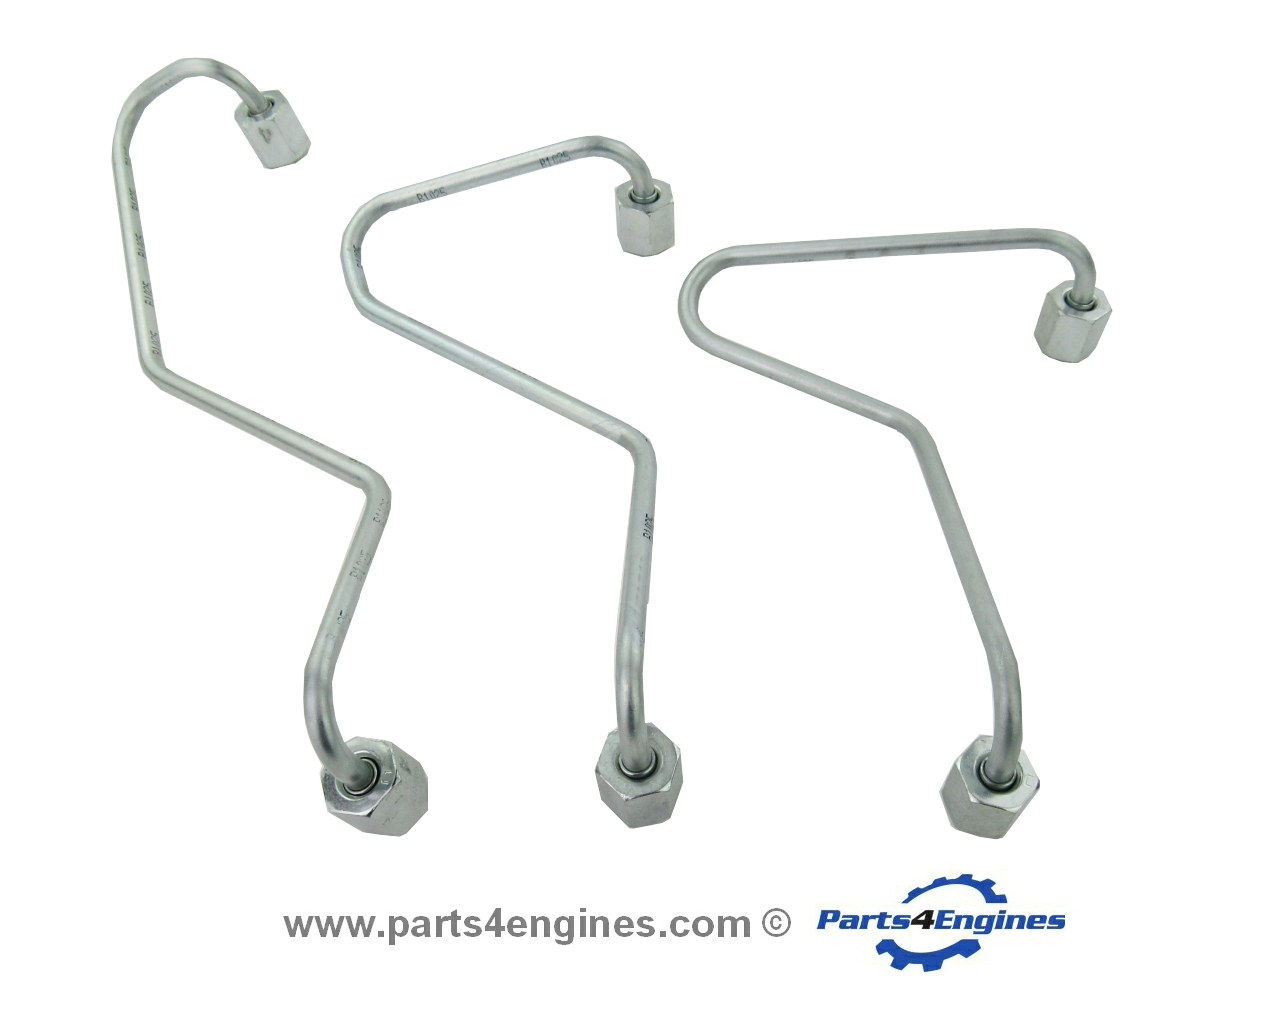 Perkins 403D-15 Injector pipe set, from parts4engines.com